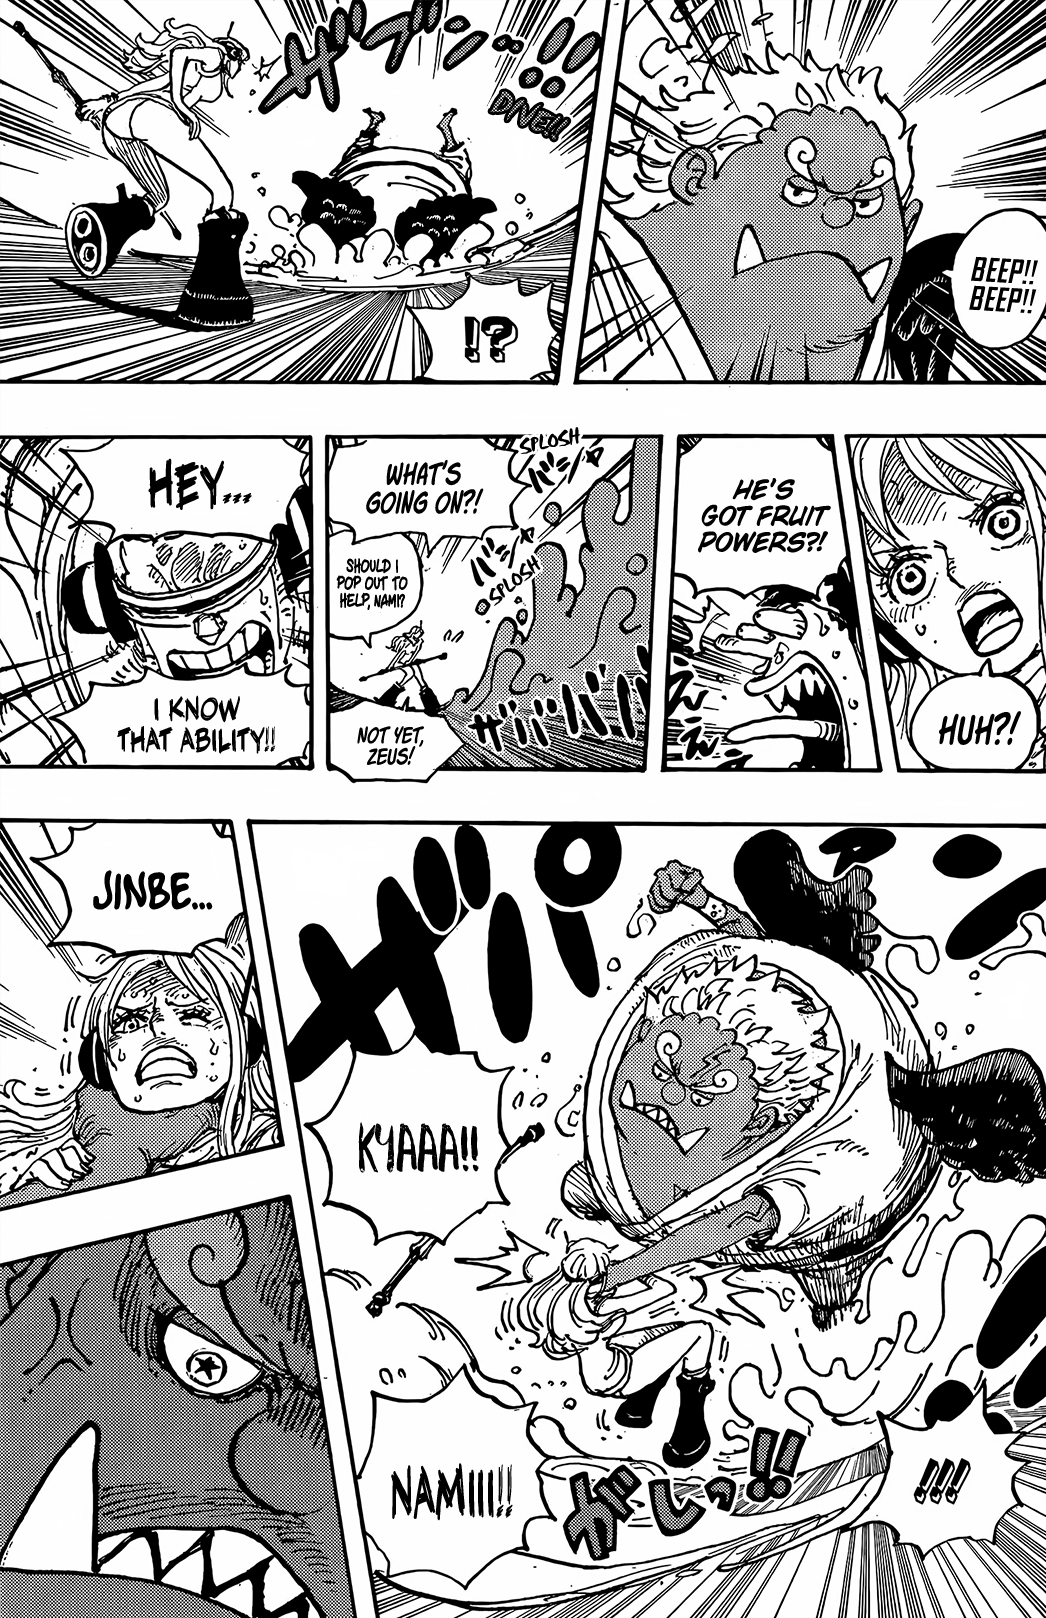 ONE PIECE Germa 66 - [Spoiler] ONE PIECE Chapter 1,065 WARNING: Read at  your own risk! If you haven't caught up yet on the latest manga chapter and  you don't want to